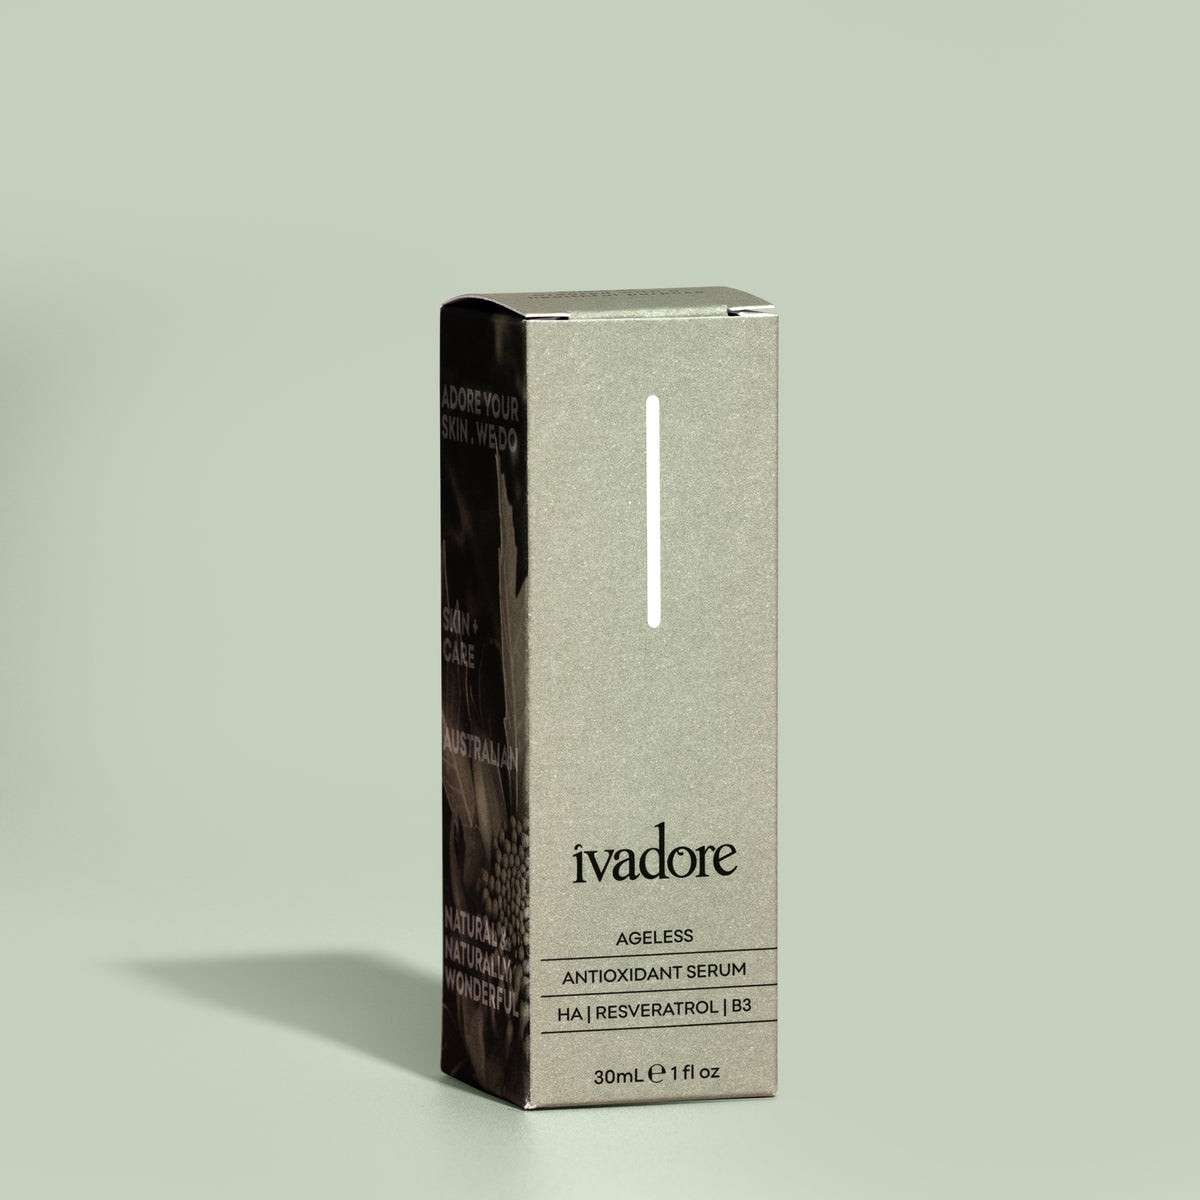 Ageless antioxidant serum packaging box on eucalypt green background with shadow